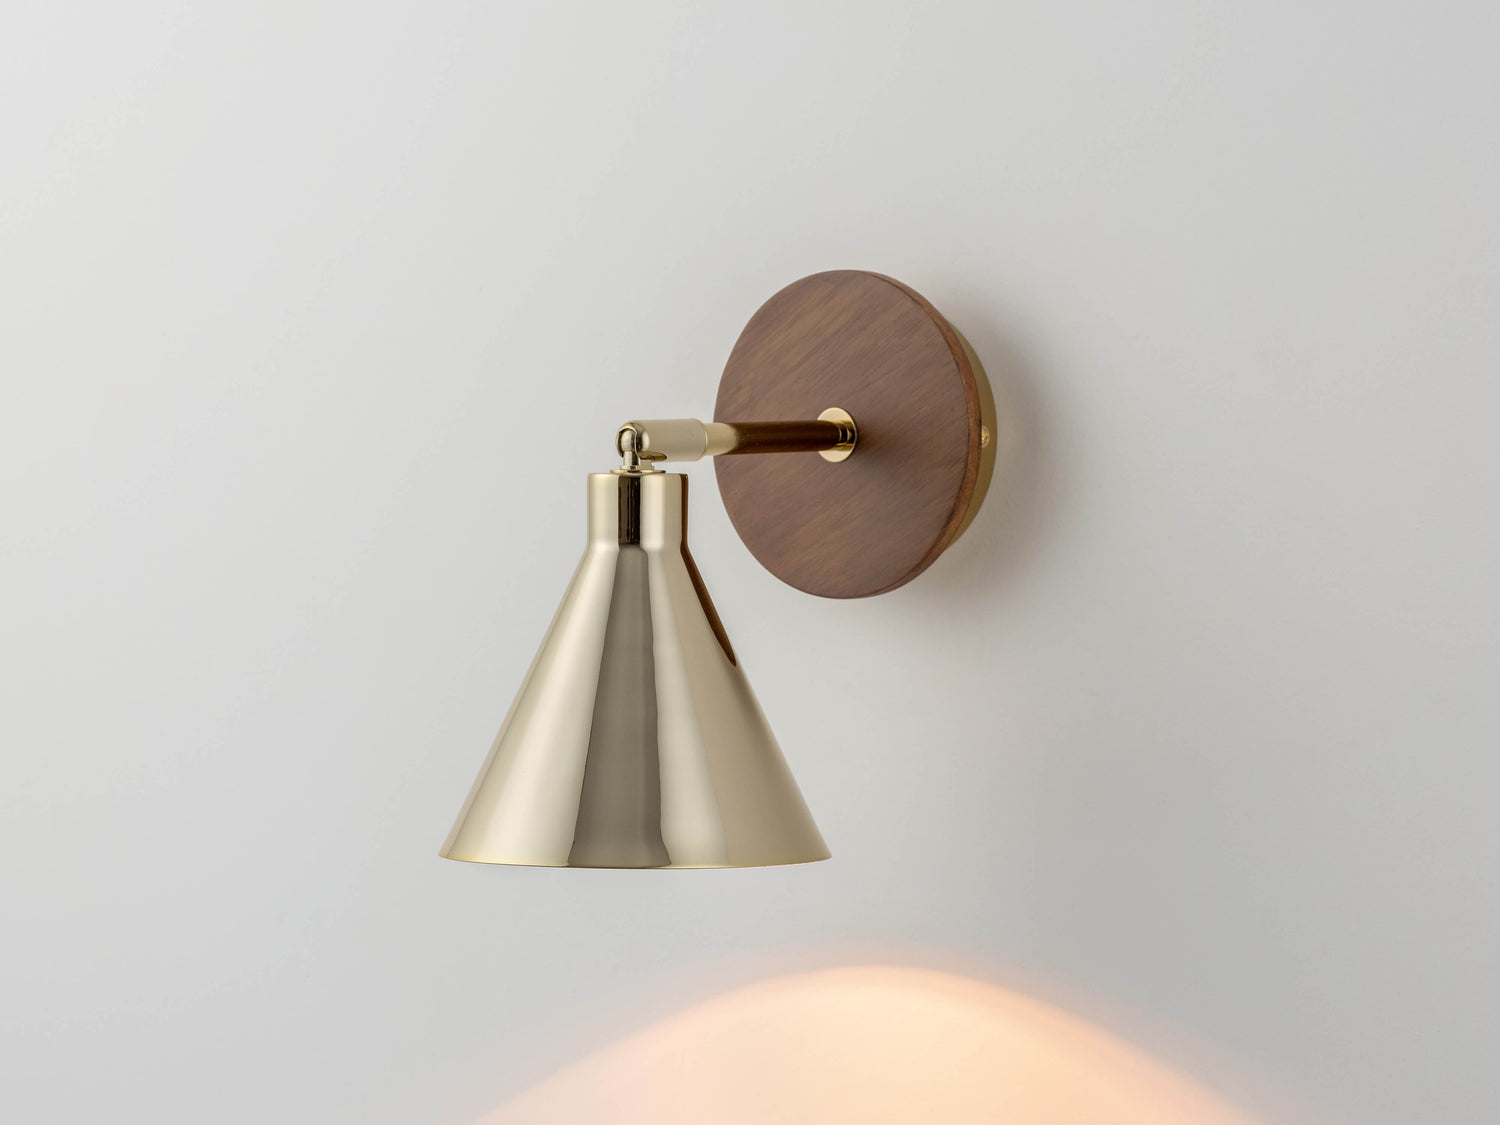 An adjustable brass metal cone shade is attached to a wood veneer wall fixture. Light is on.